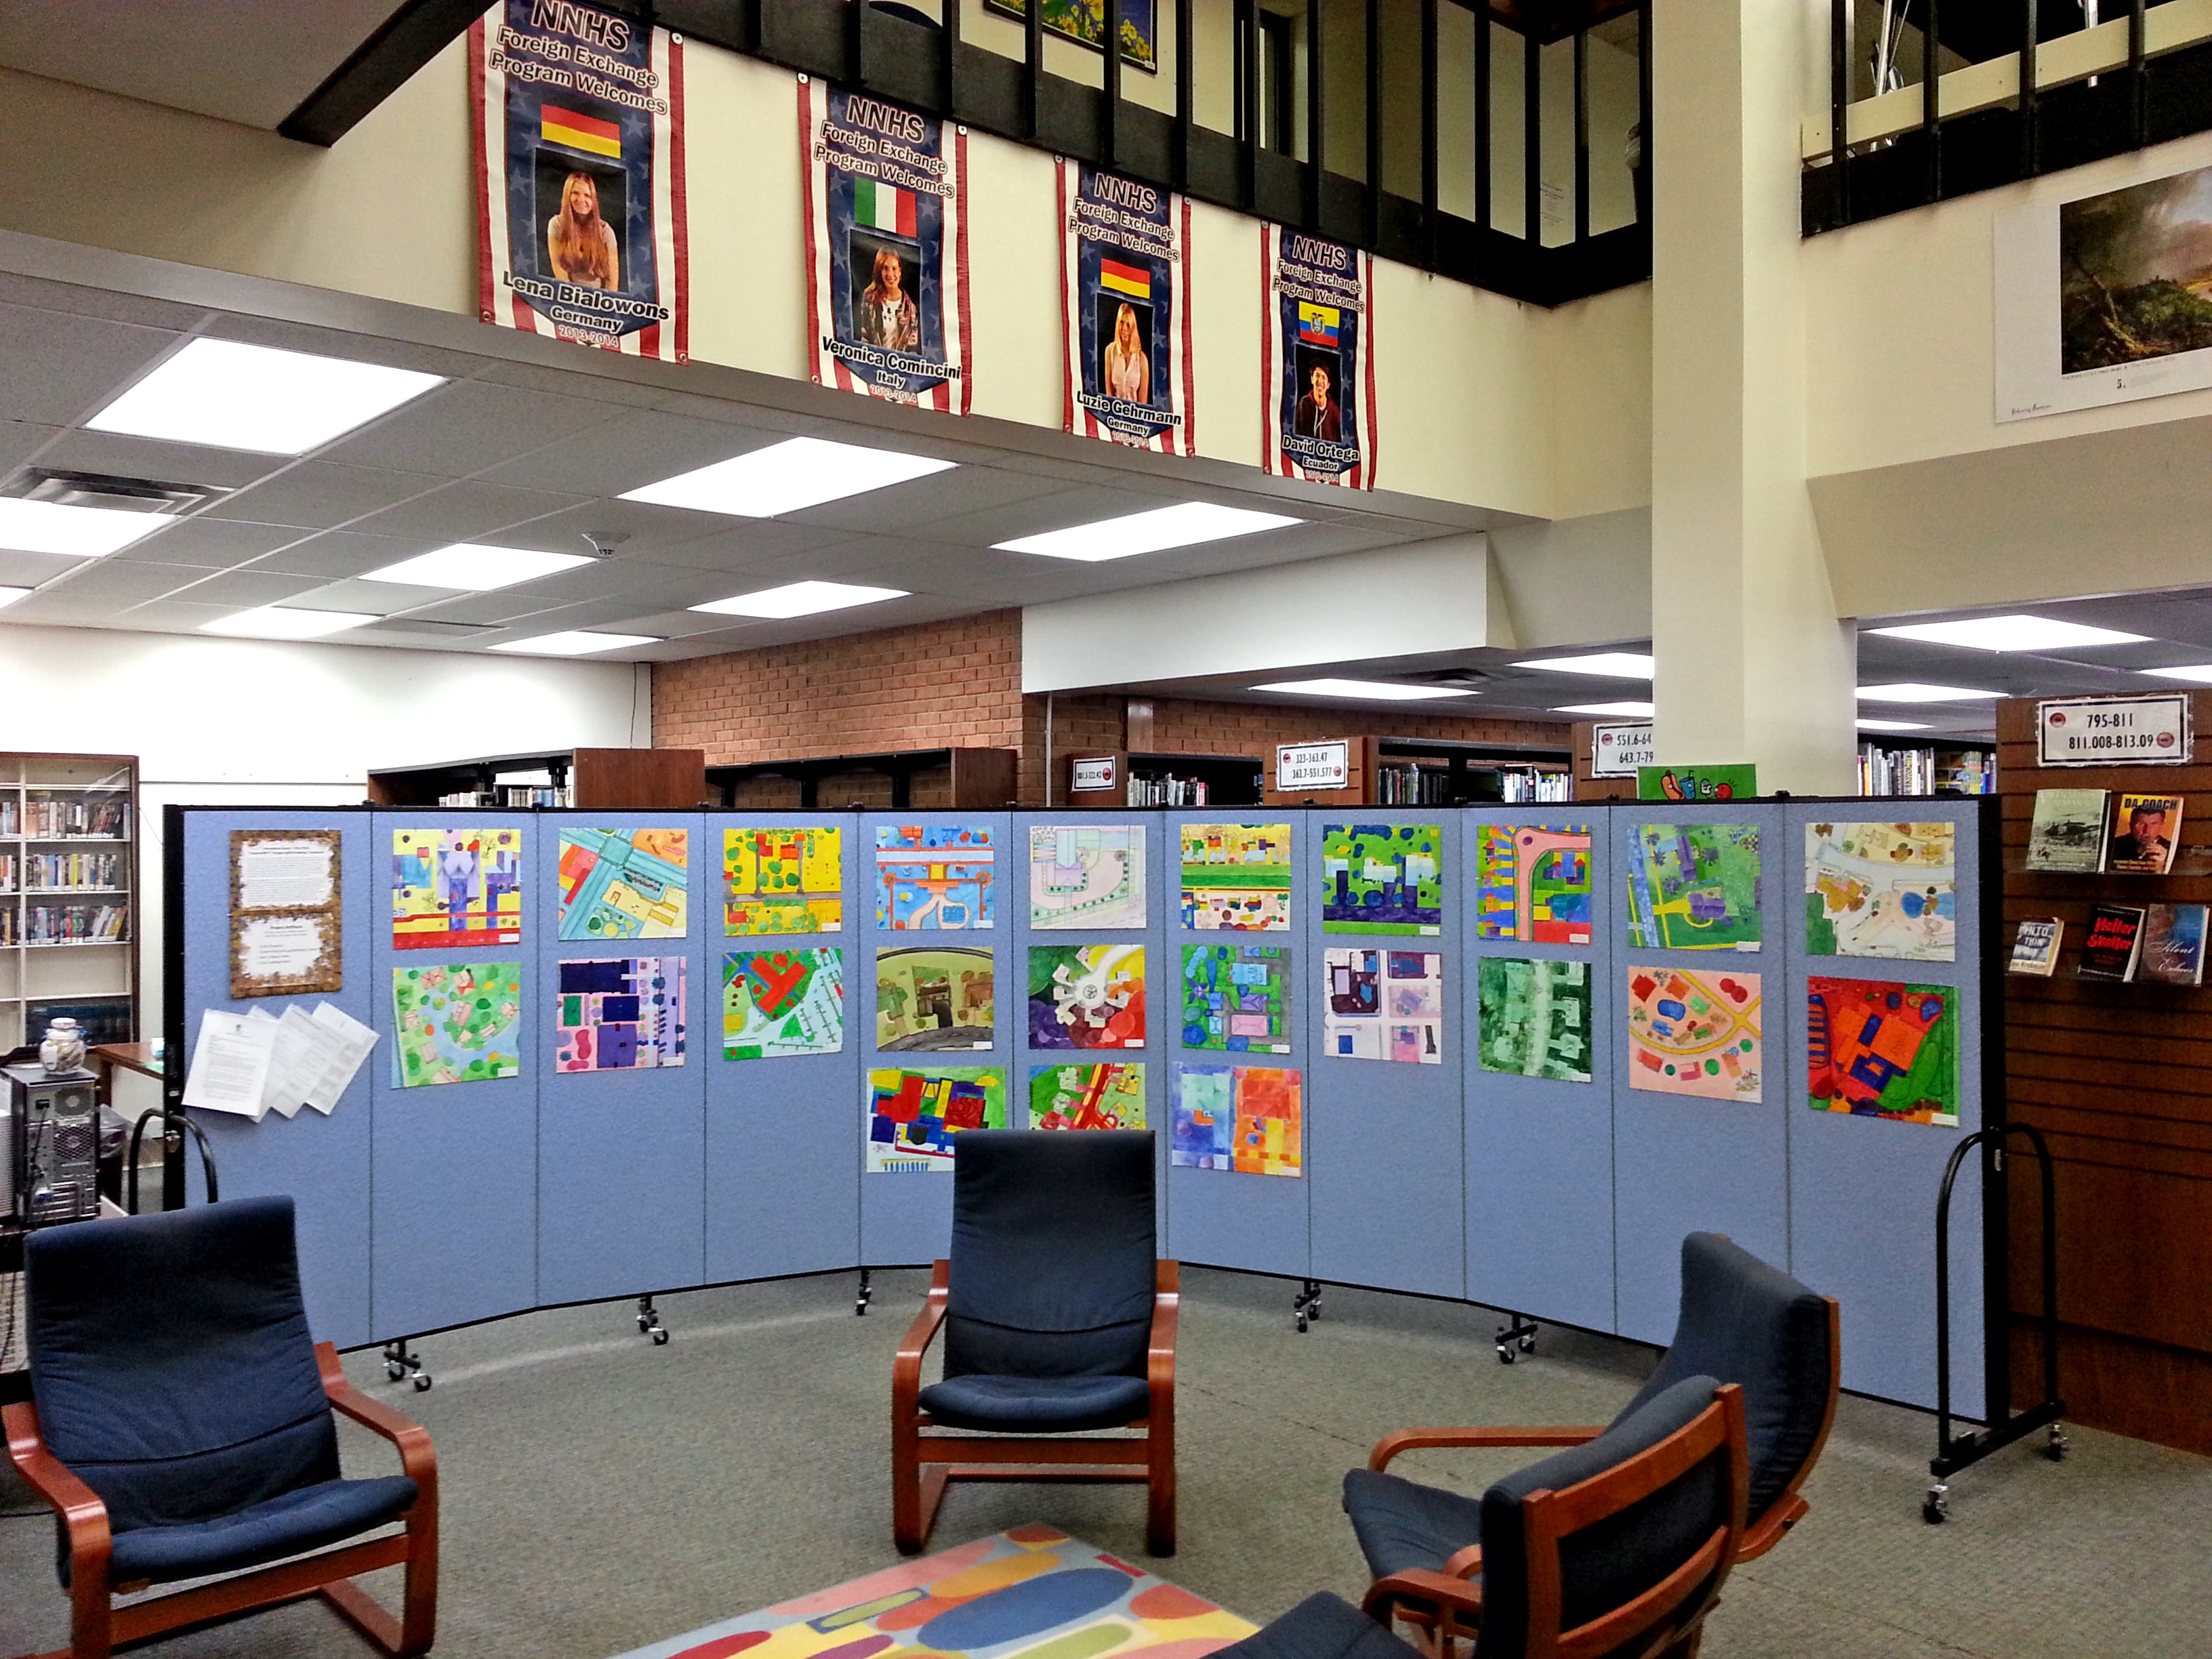 Student artwork displayed on an eleven panel room divider in a school library